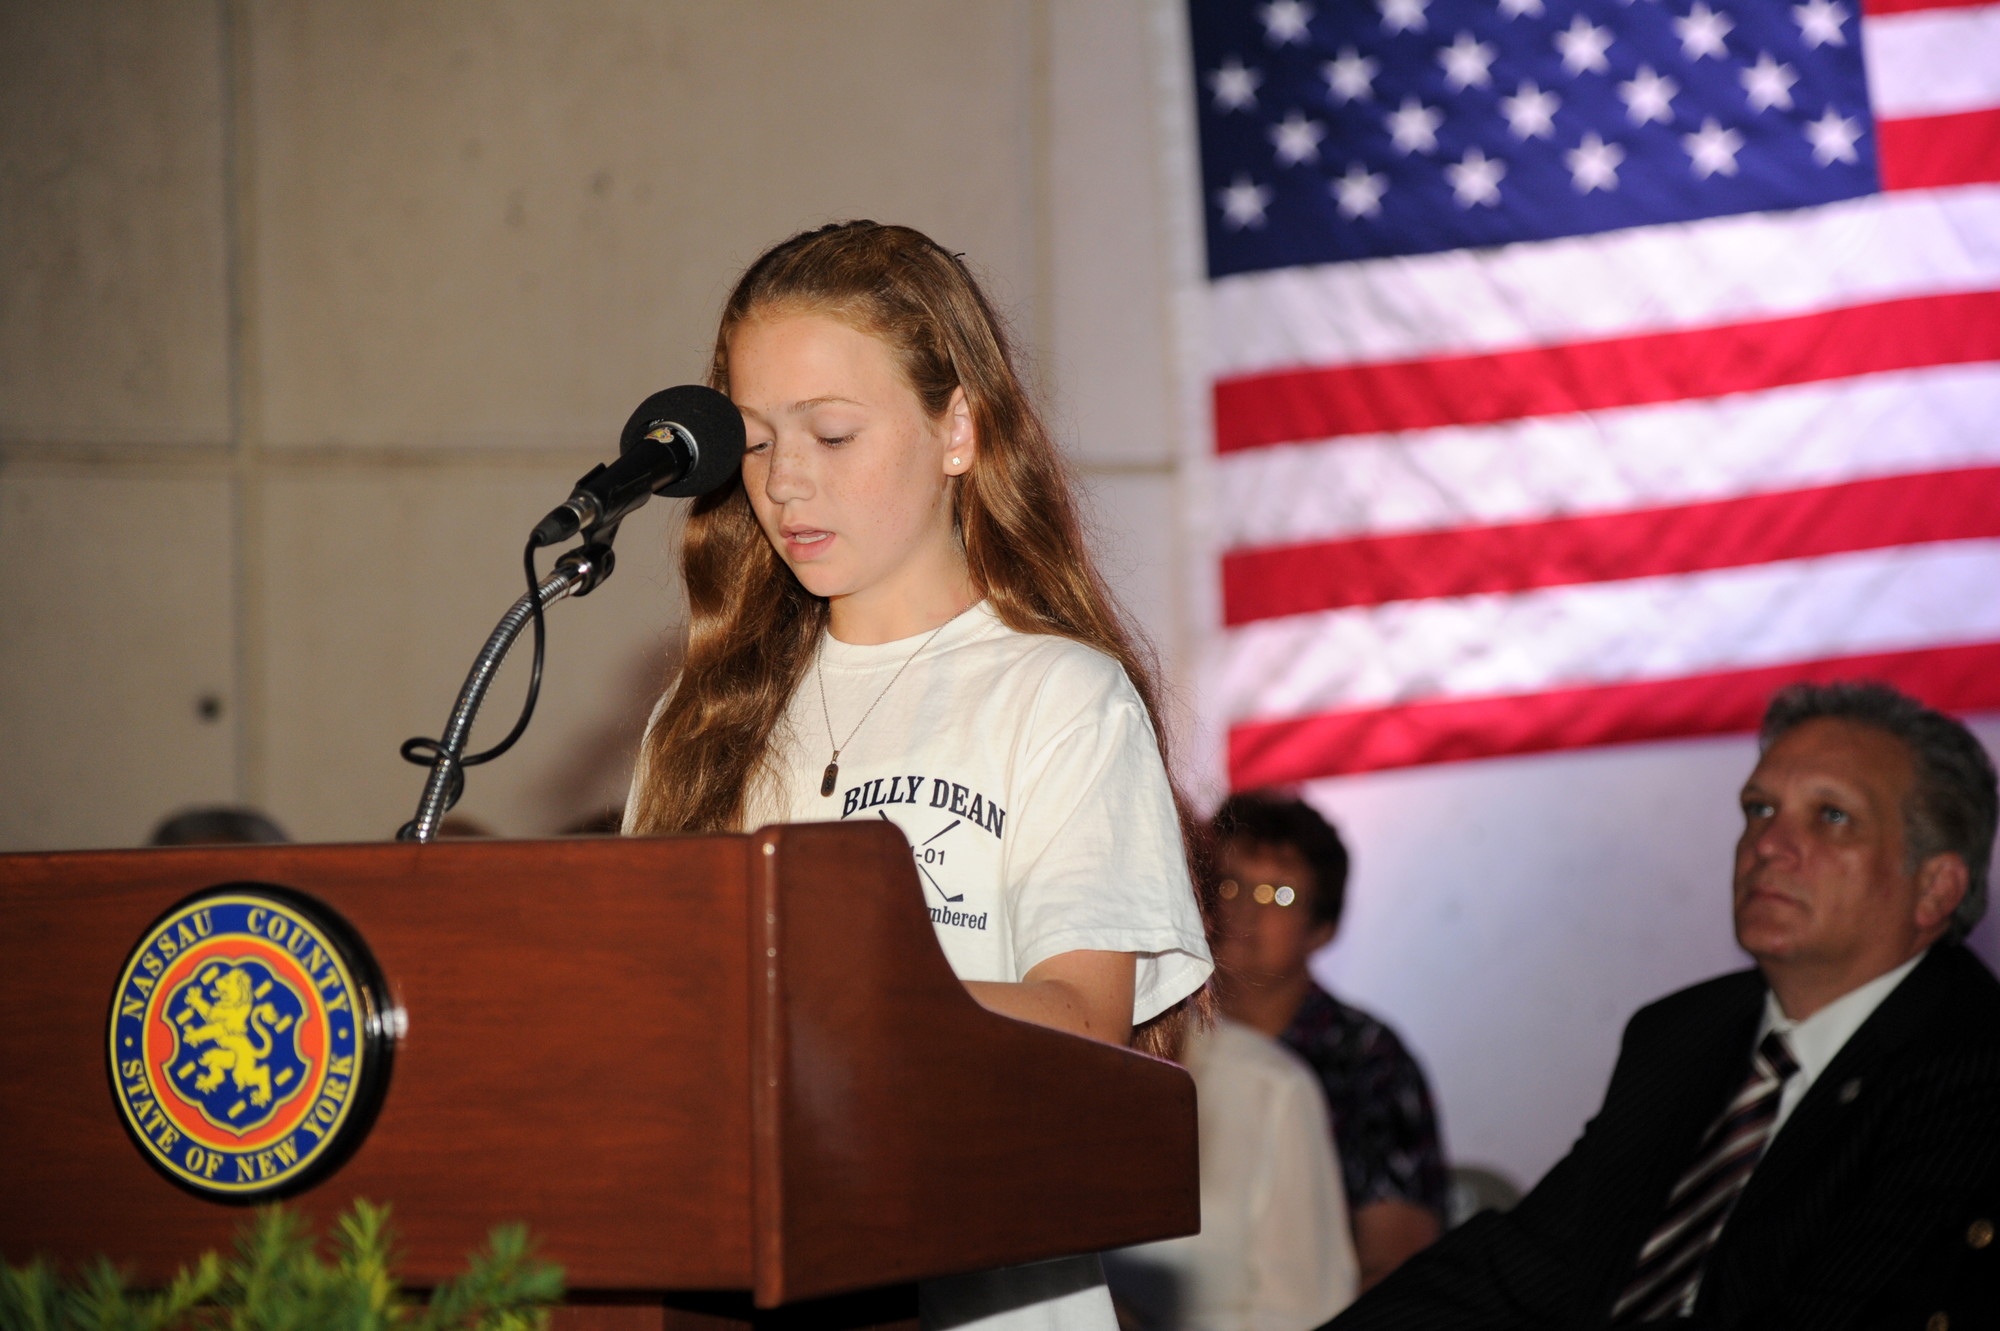 Claire Dean recited names of Sept. 11 victims, including her father, Billy Dean.